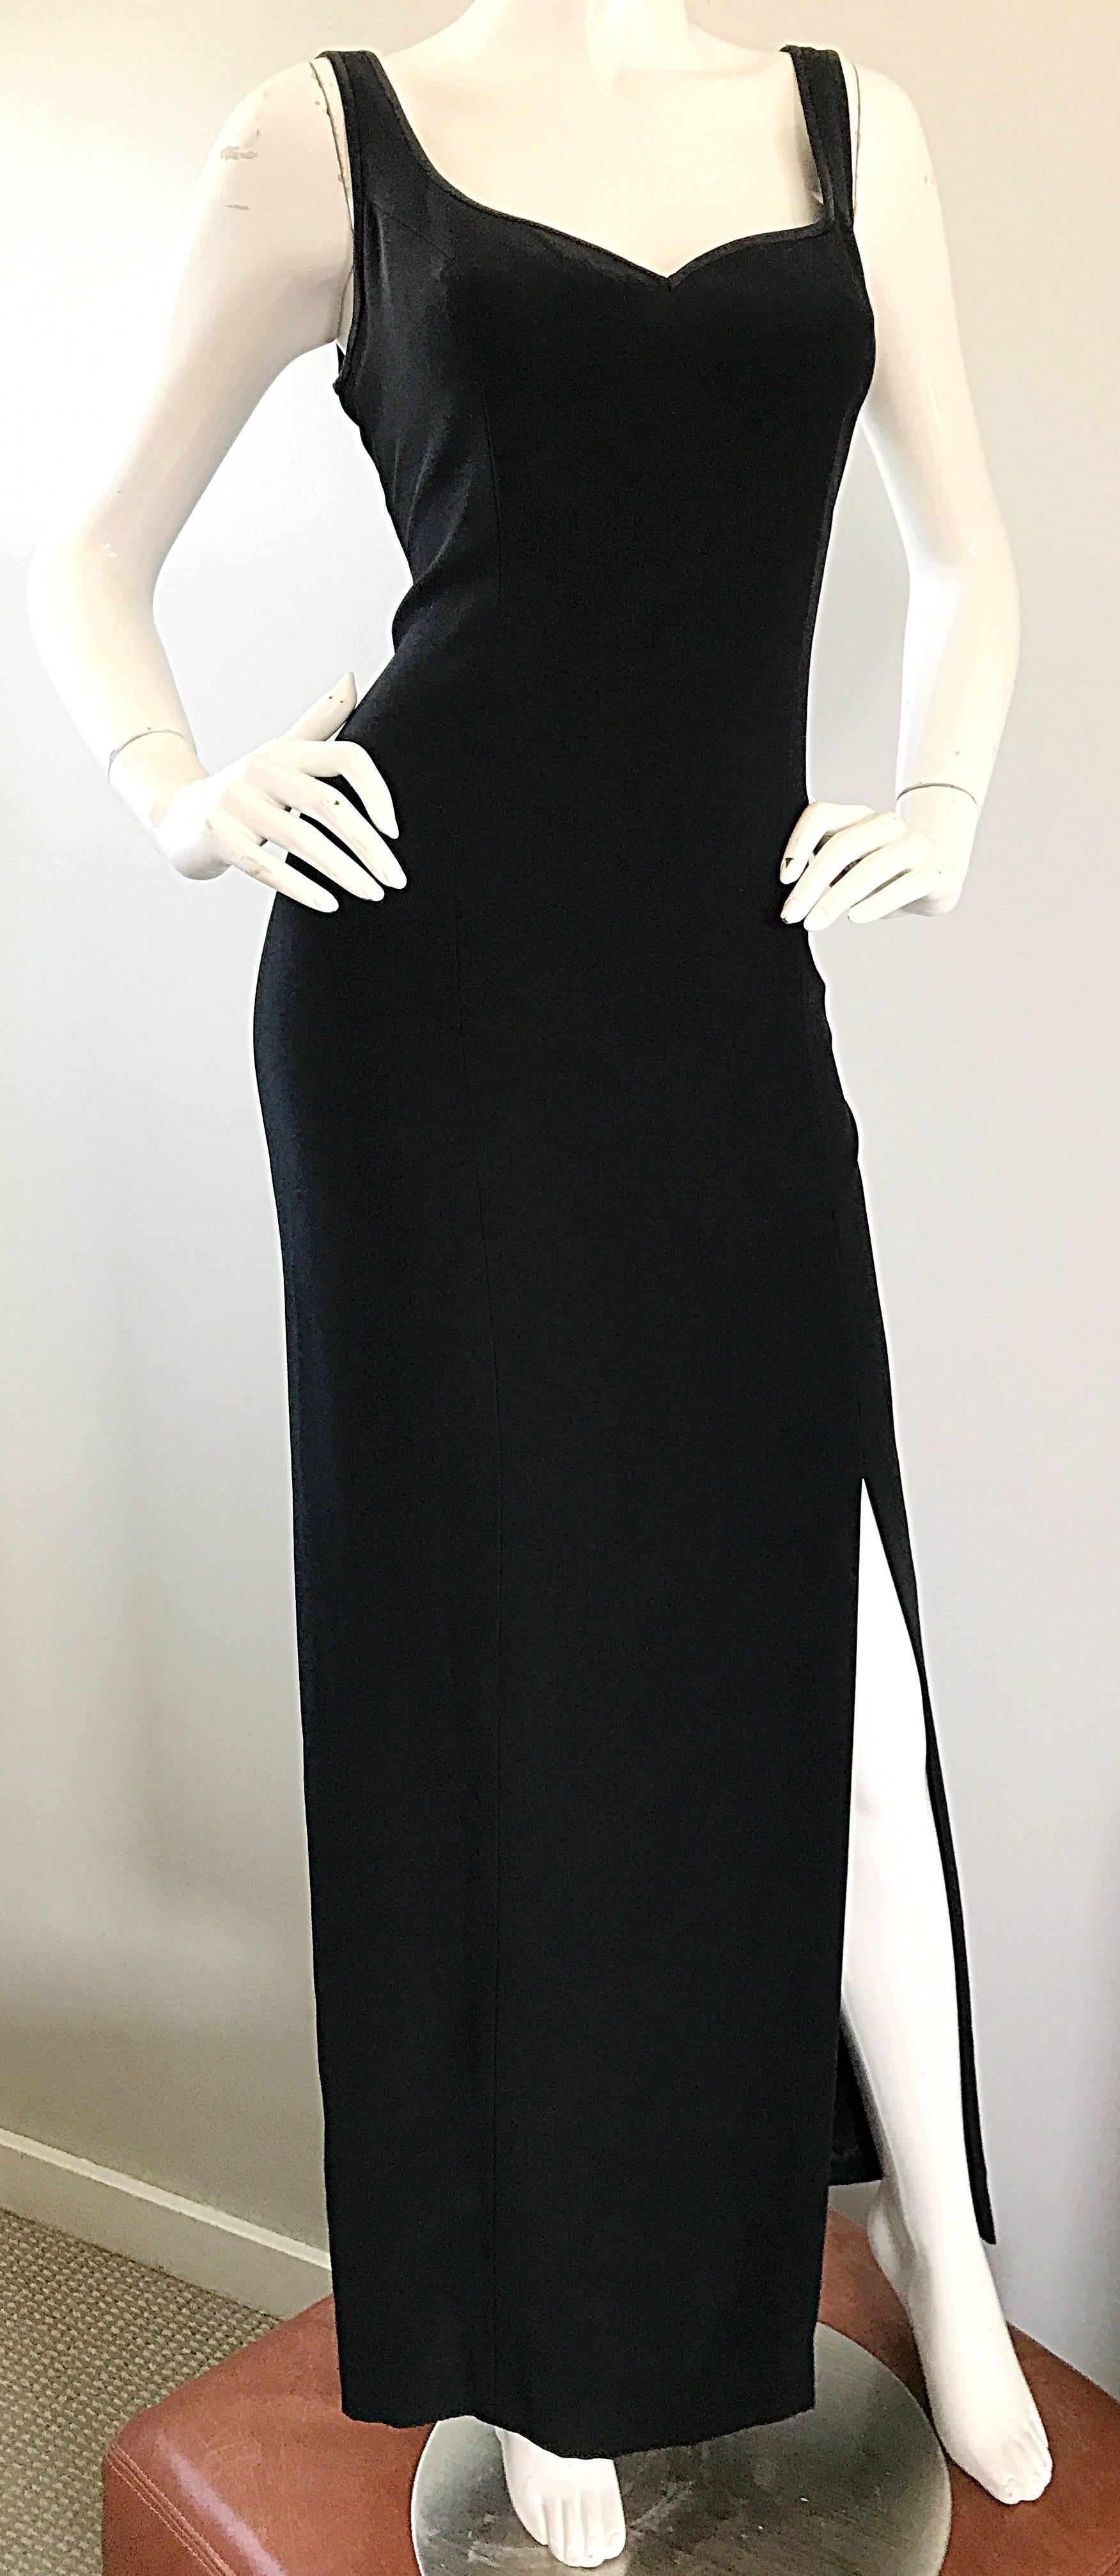 1990s Bob Mackie Size 10 Black Crepe Sexy 90s Vintage High Slit Evening Gown  For Sale 1